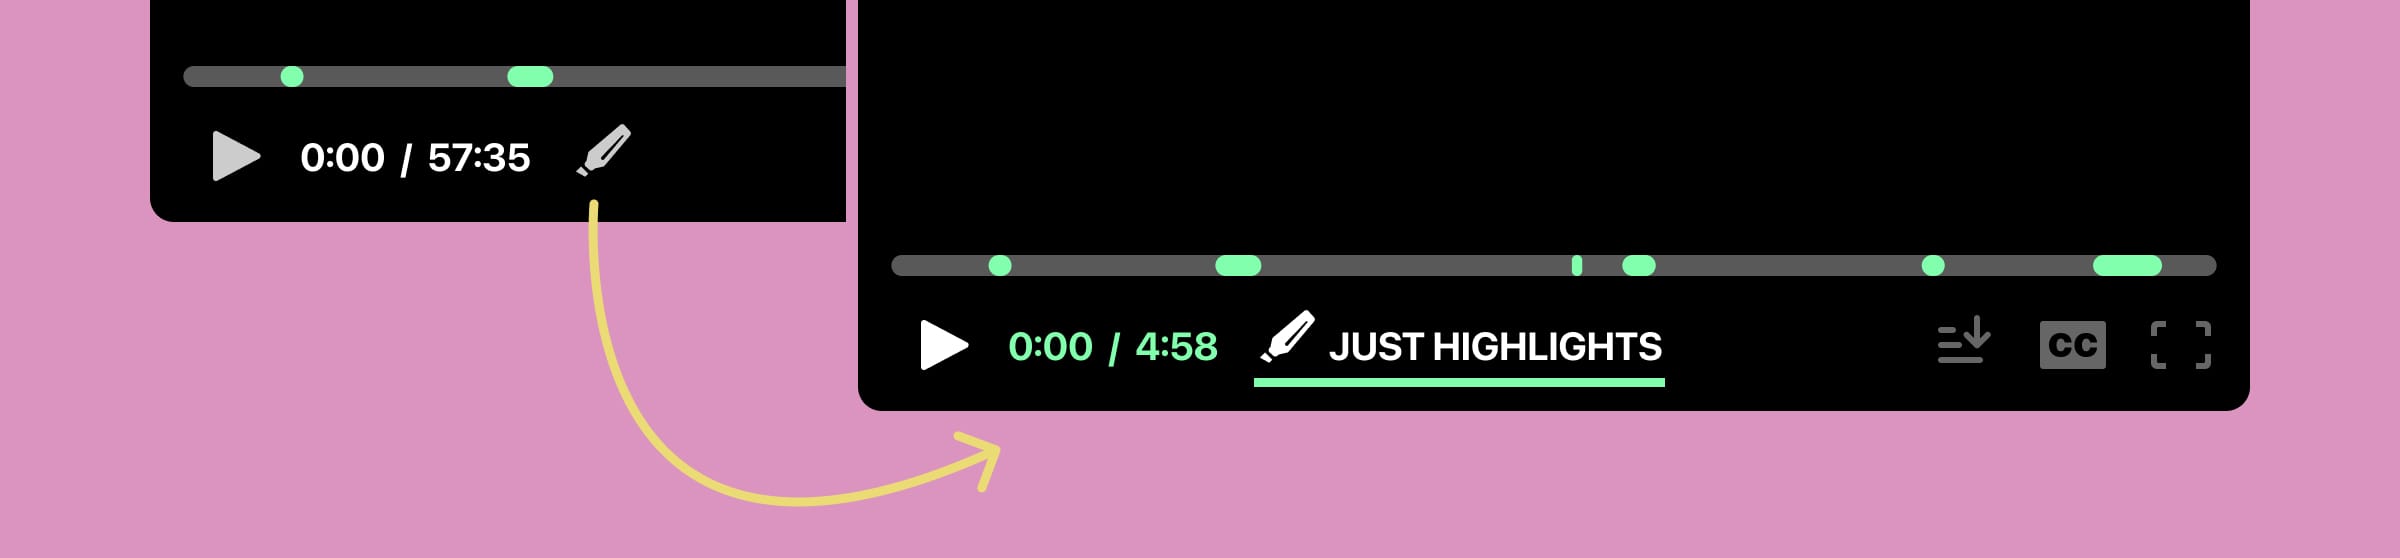 Illustration of two video players with an arrow showing that clicking the highlight button will reduce the watch time from 1 hour down to 5 minutes